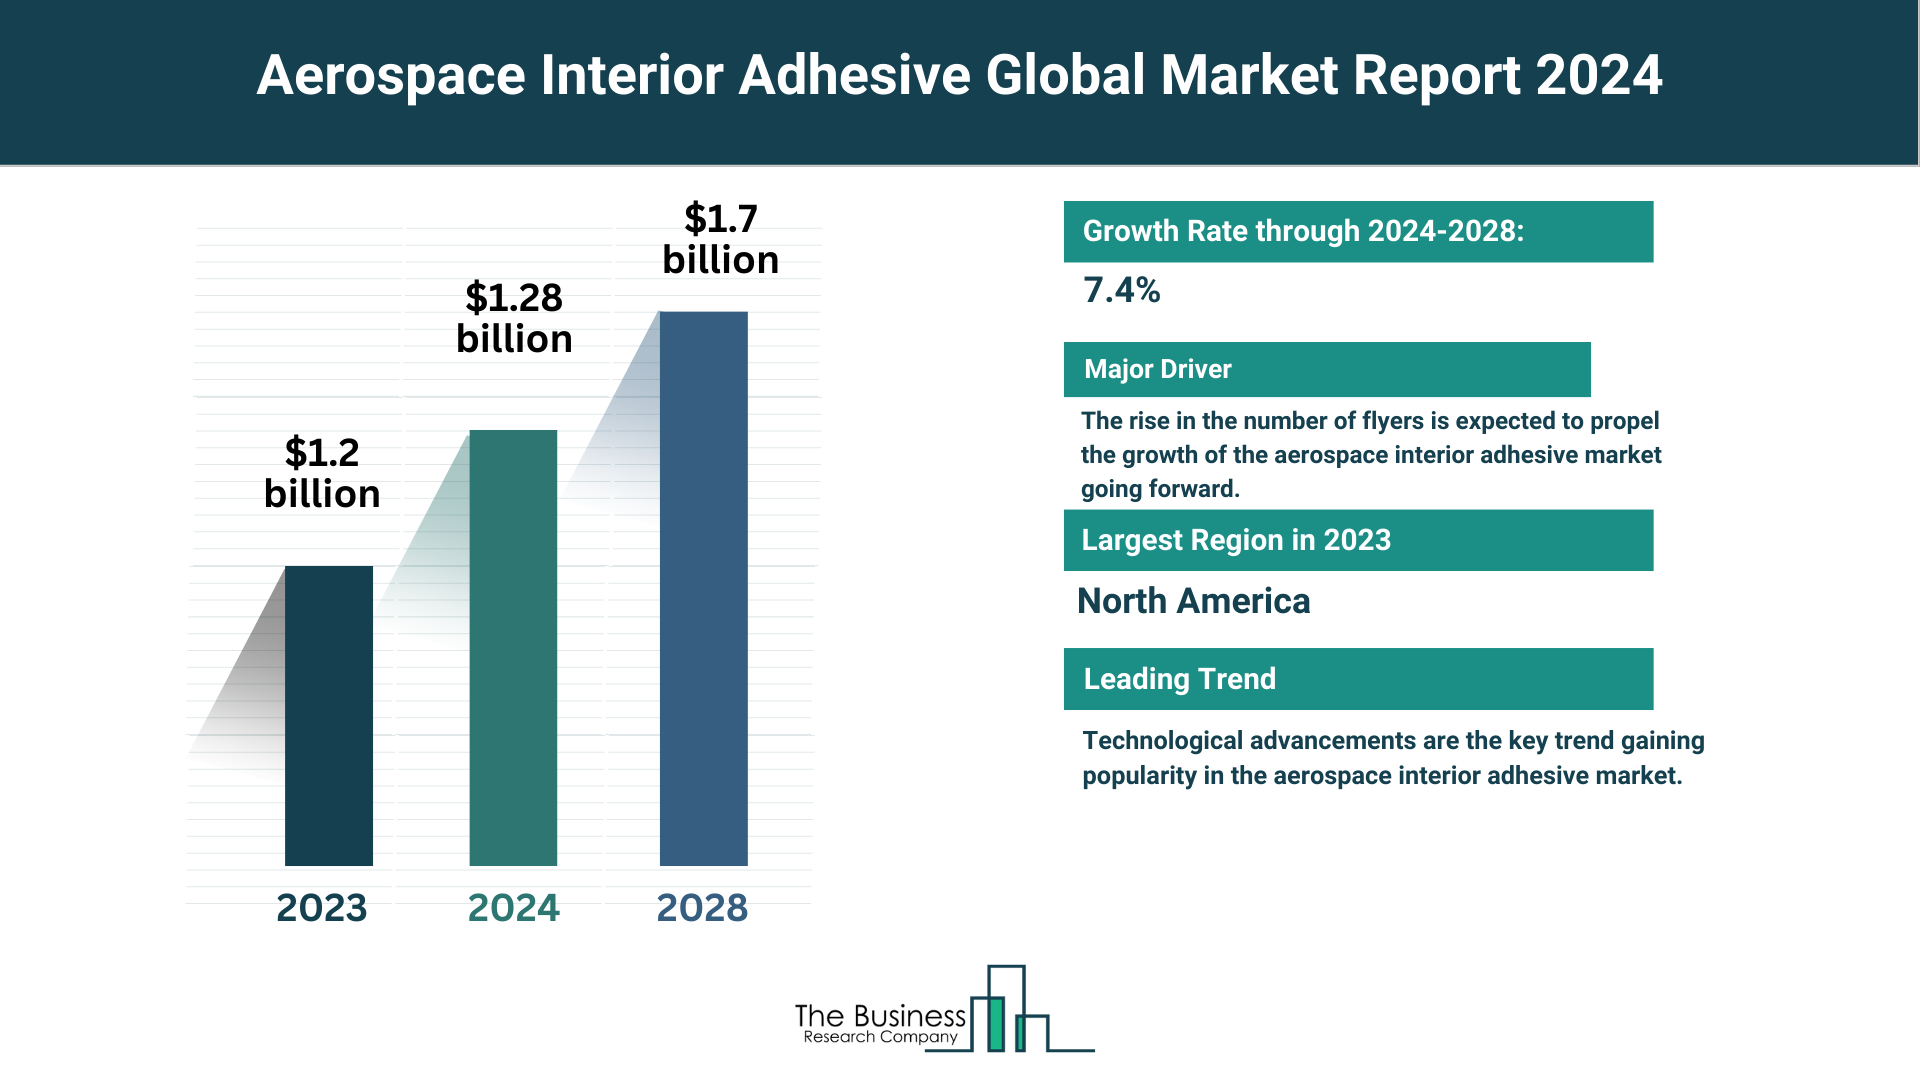 5 Key Takeaways From The Aerospace Interior Adhesive Market Report 2024